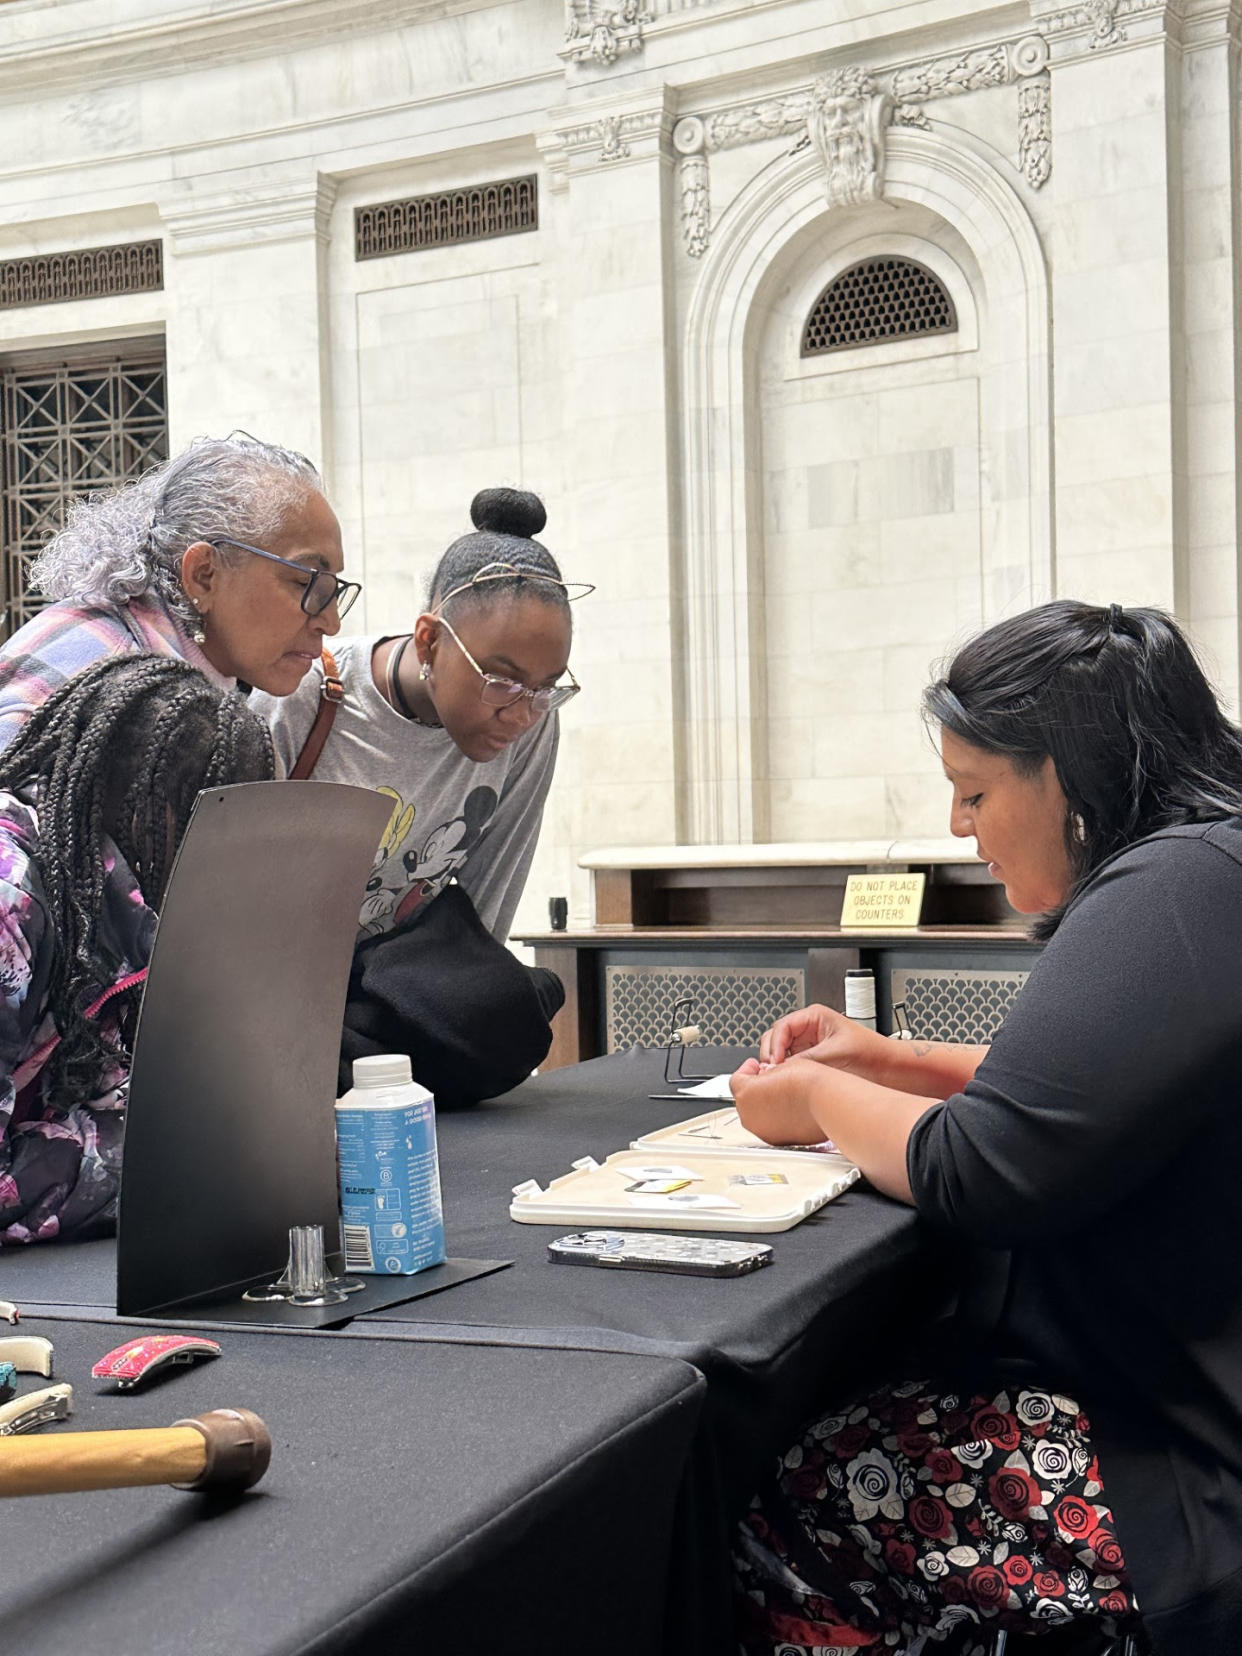 Artist Courtney Parchcorn-John demonstrates beading to patrons during the National Museum of the American Indian (NMAI) NY Women’s History Month: “Beauty of Beadwork” exhibition, recently. (Photo/Chickasaw Nation Media)